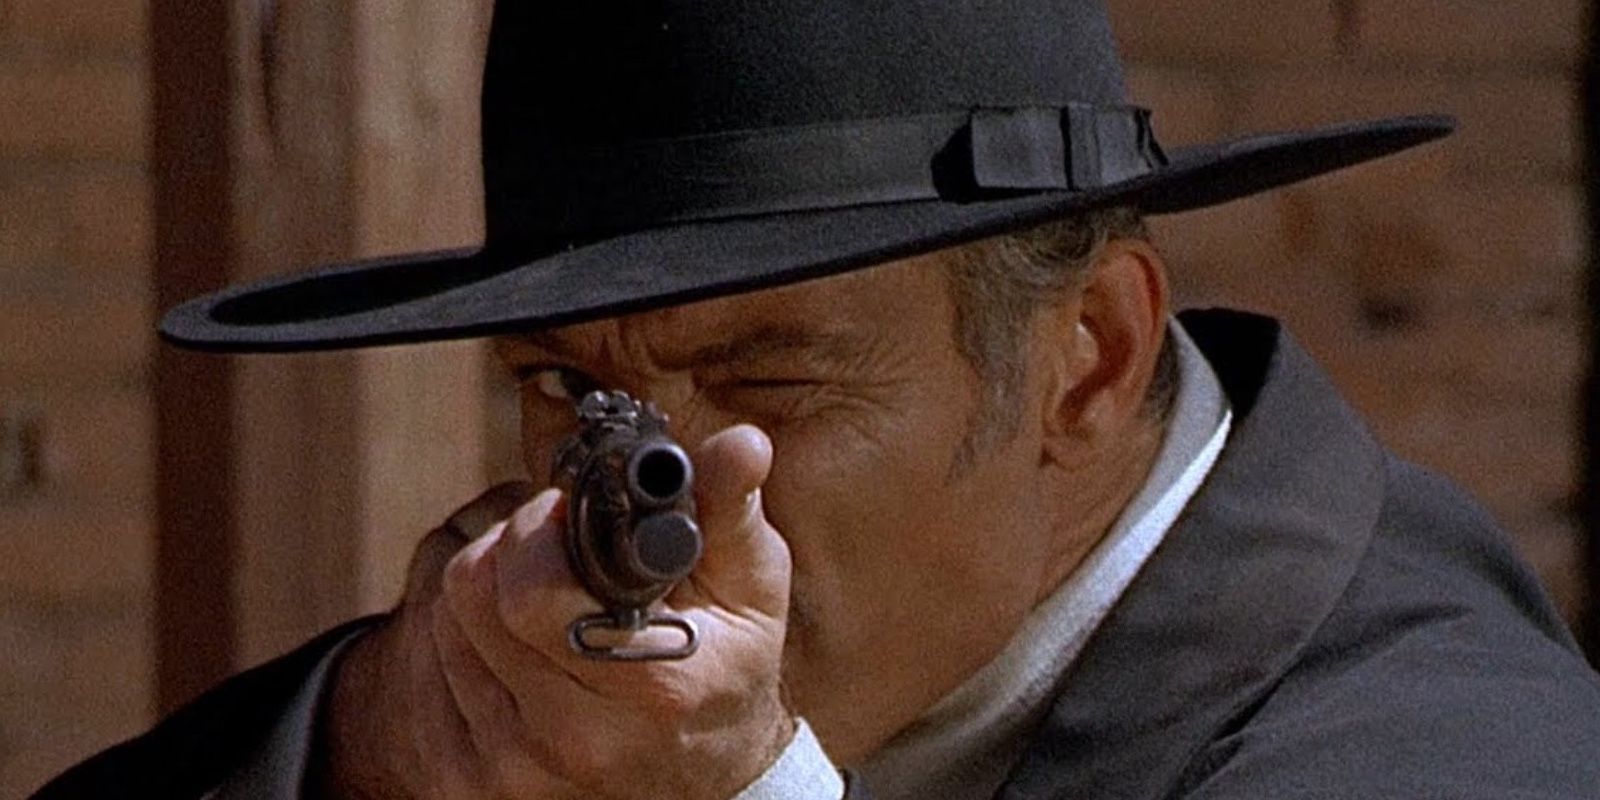 Angel Eyes (Lee van Cleef) aims a pistol at the screen in The Good, The Bad and the Ugly